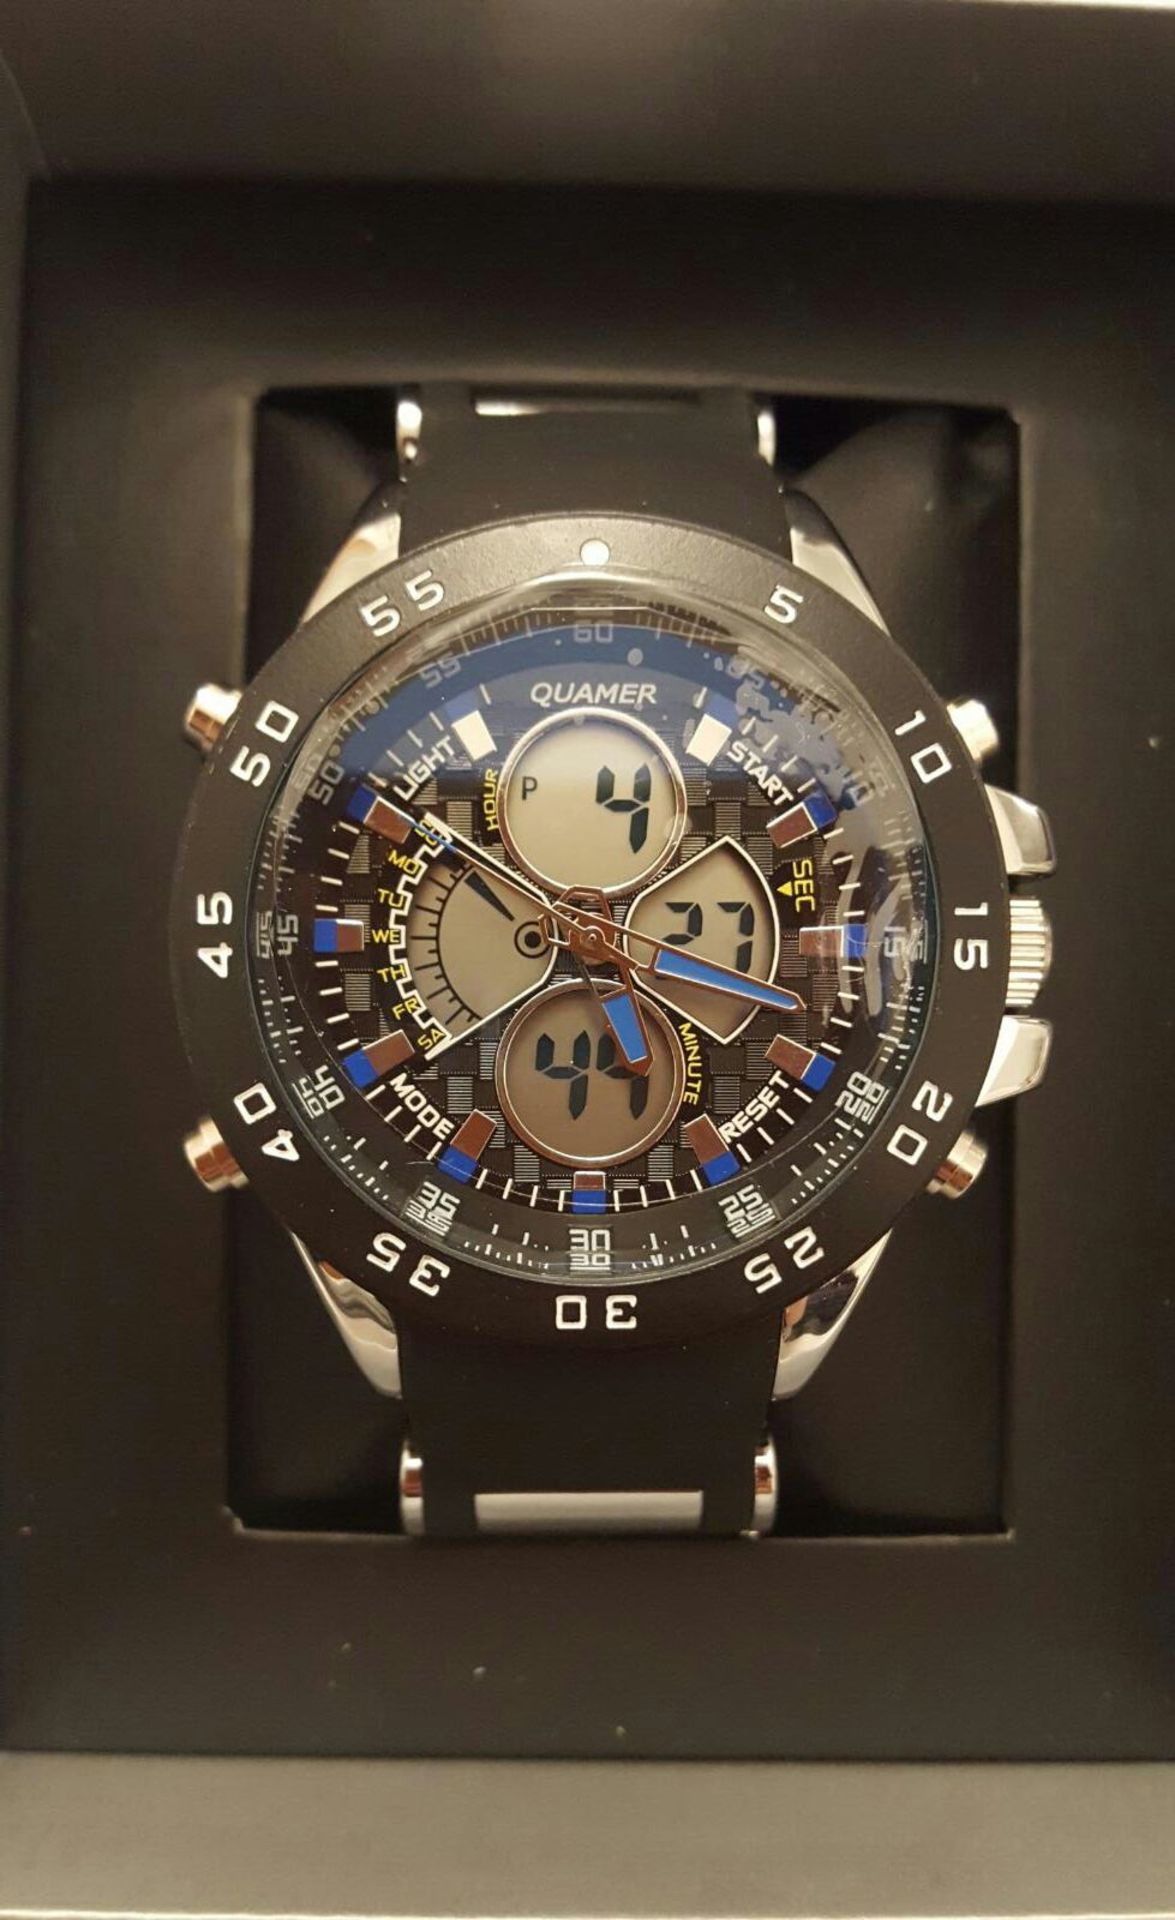 BRAND NEW QUAMER GENTS MULTI FUNCTIONAL DIGITAL WATCH, BLUE/ BLACK FACE WITH BLACK/ SILVER STRAP,